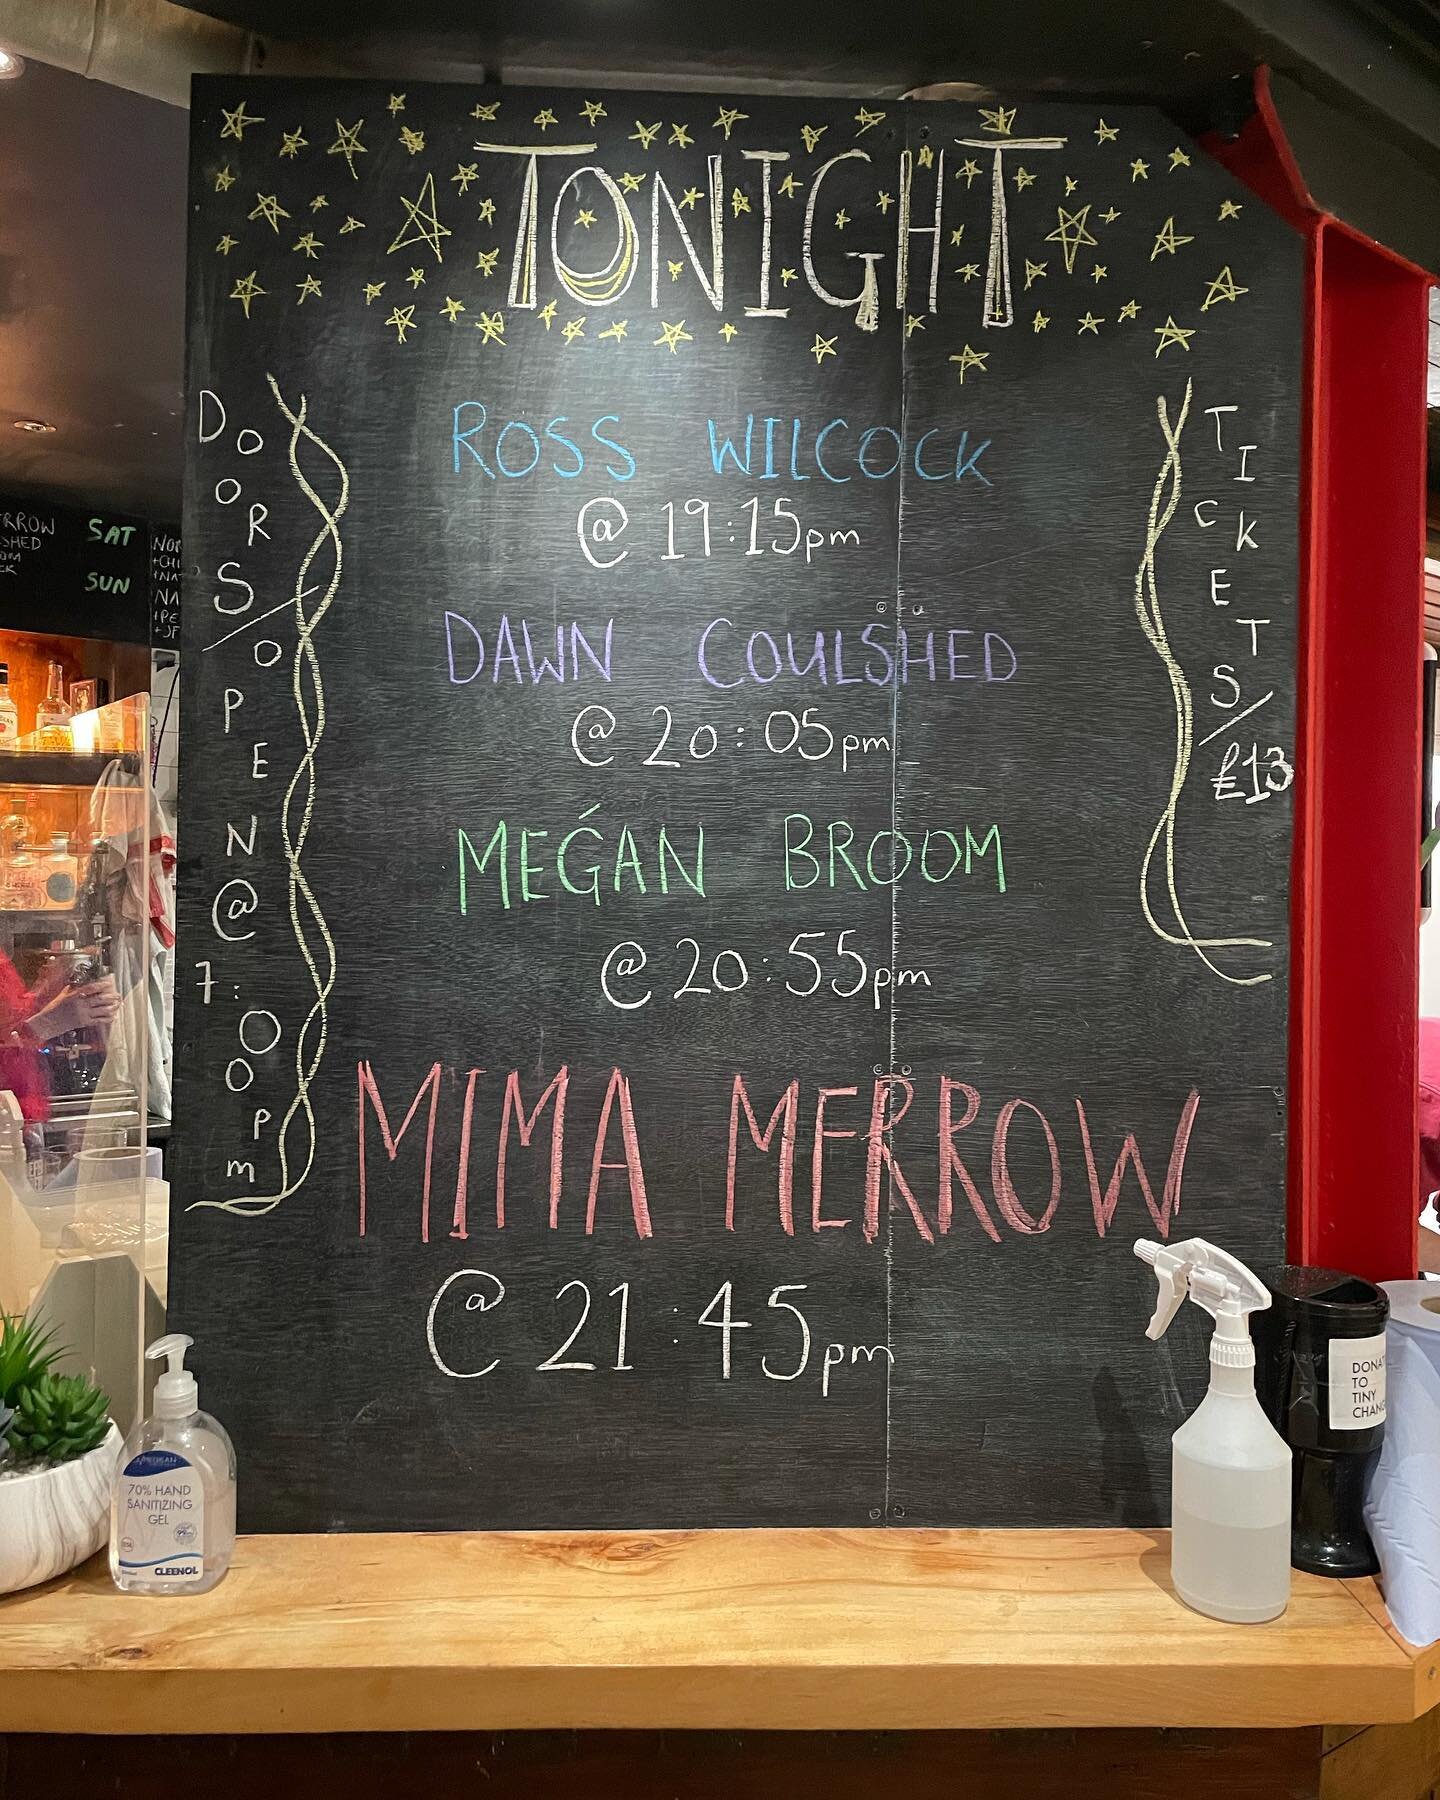 Stilll time to see Mima Merrow at the Hug and Pint. Come on down offbeat and lyrical music lovers @mimamerrow &hearts;️